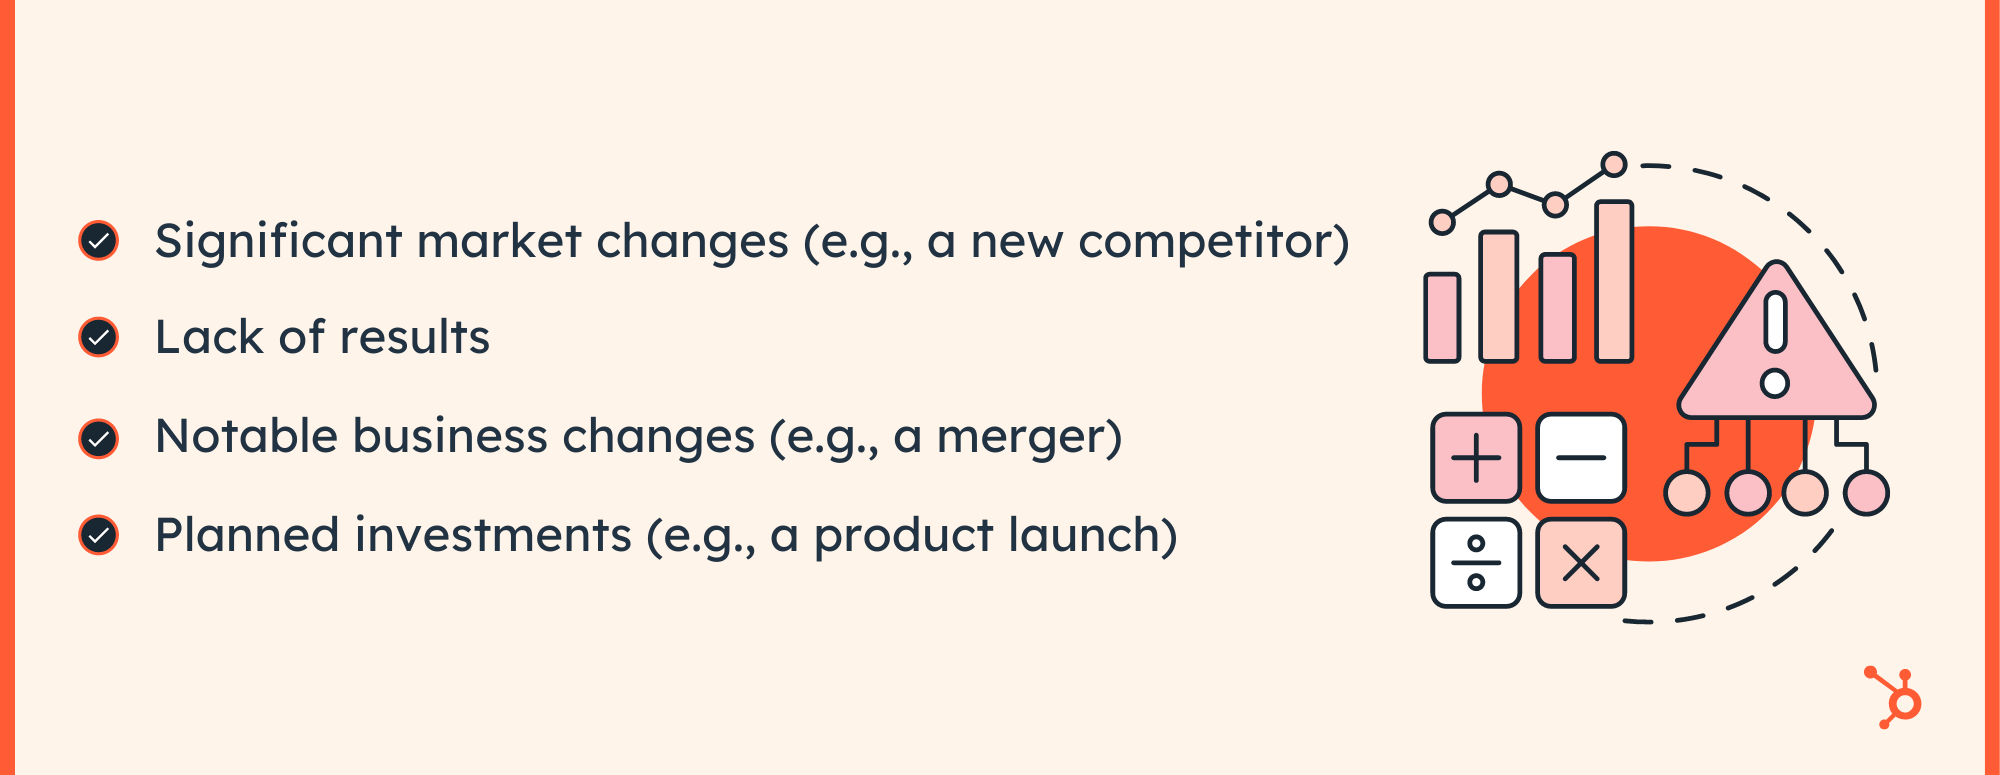  important marketplace changes (e.g., a caller competitor), deficiency of results, notable business changes (e.g., a merger), and/or planned investments (e.g., a rebrand aliases caller merchandise launch).